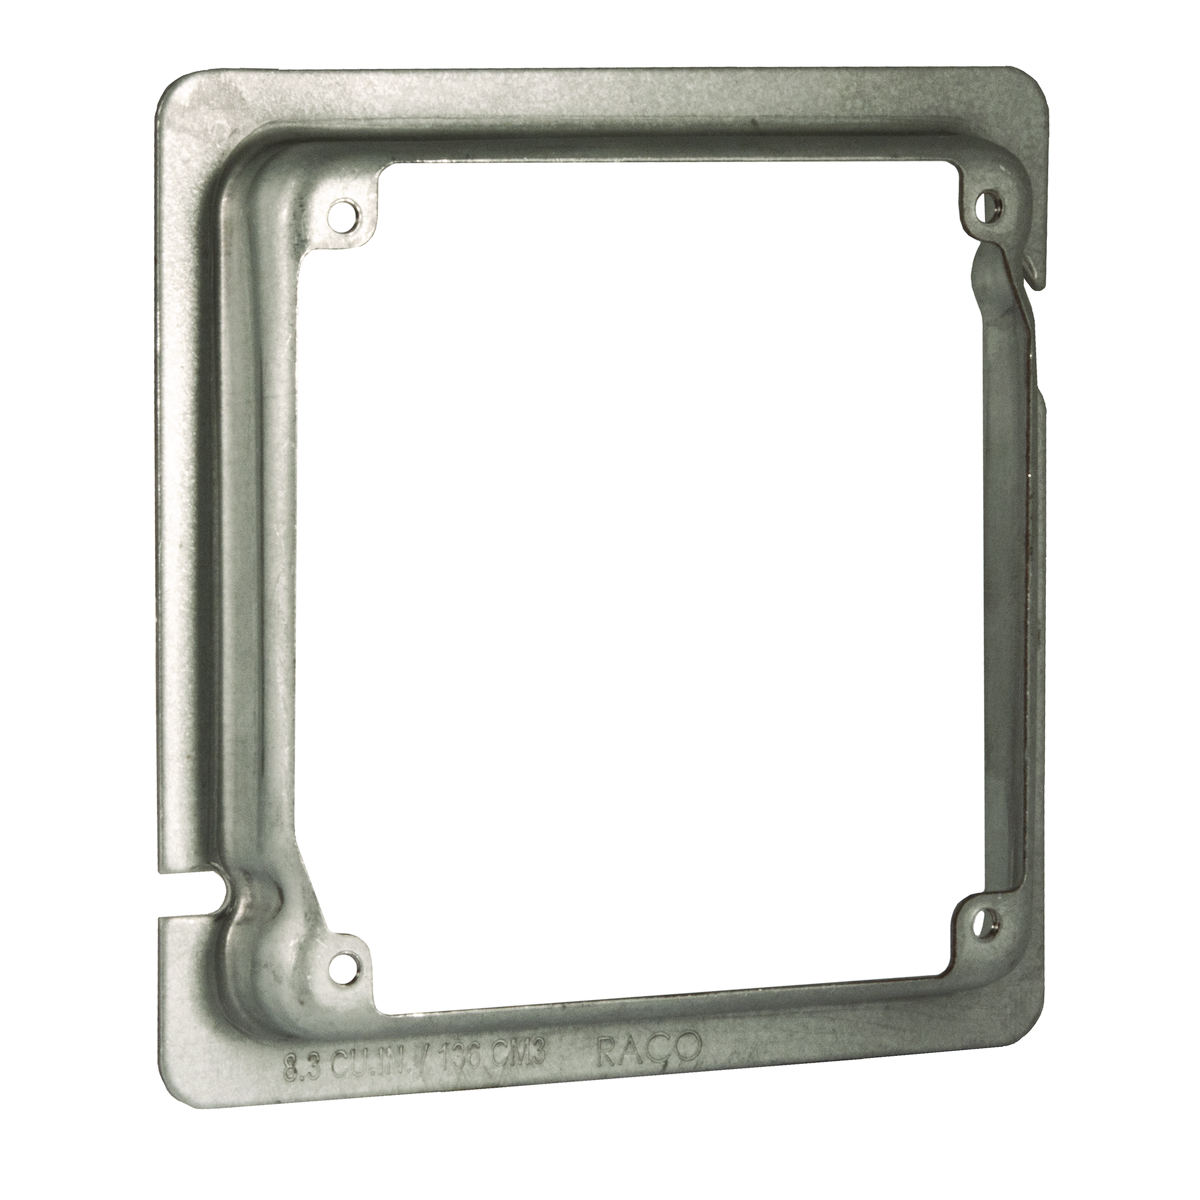 4-11/16 TO 4SQ ADAPTER RING - RAISED 5/8